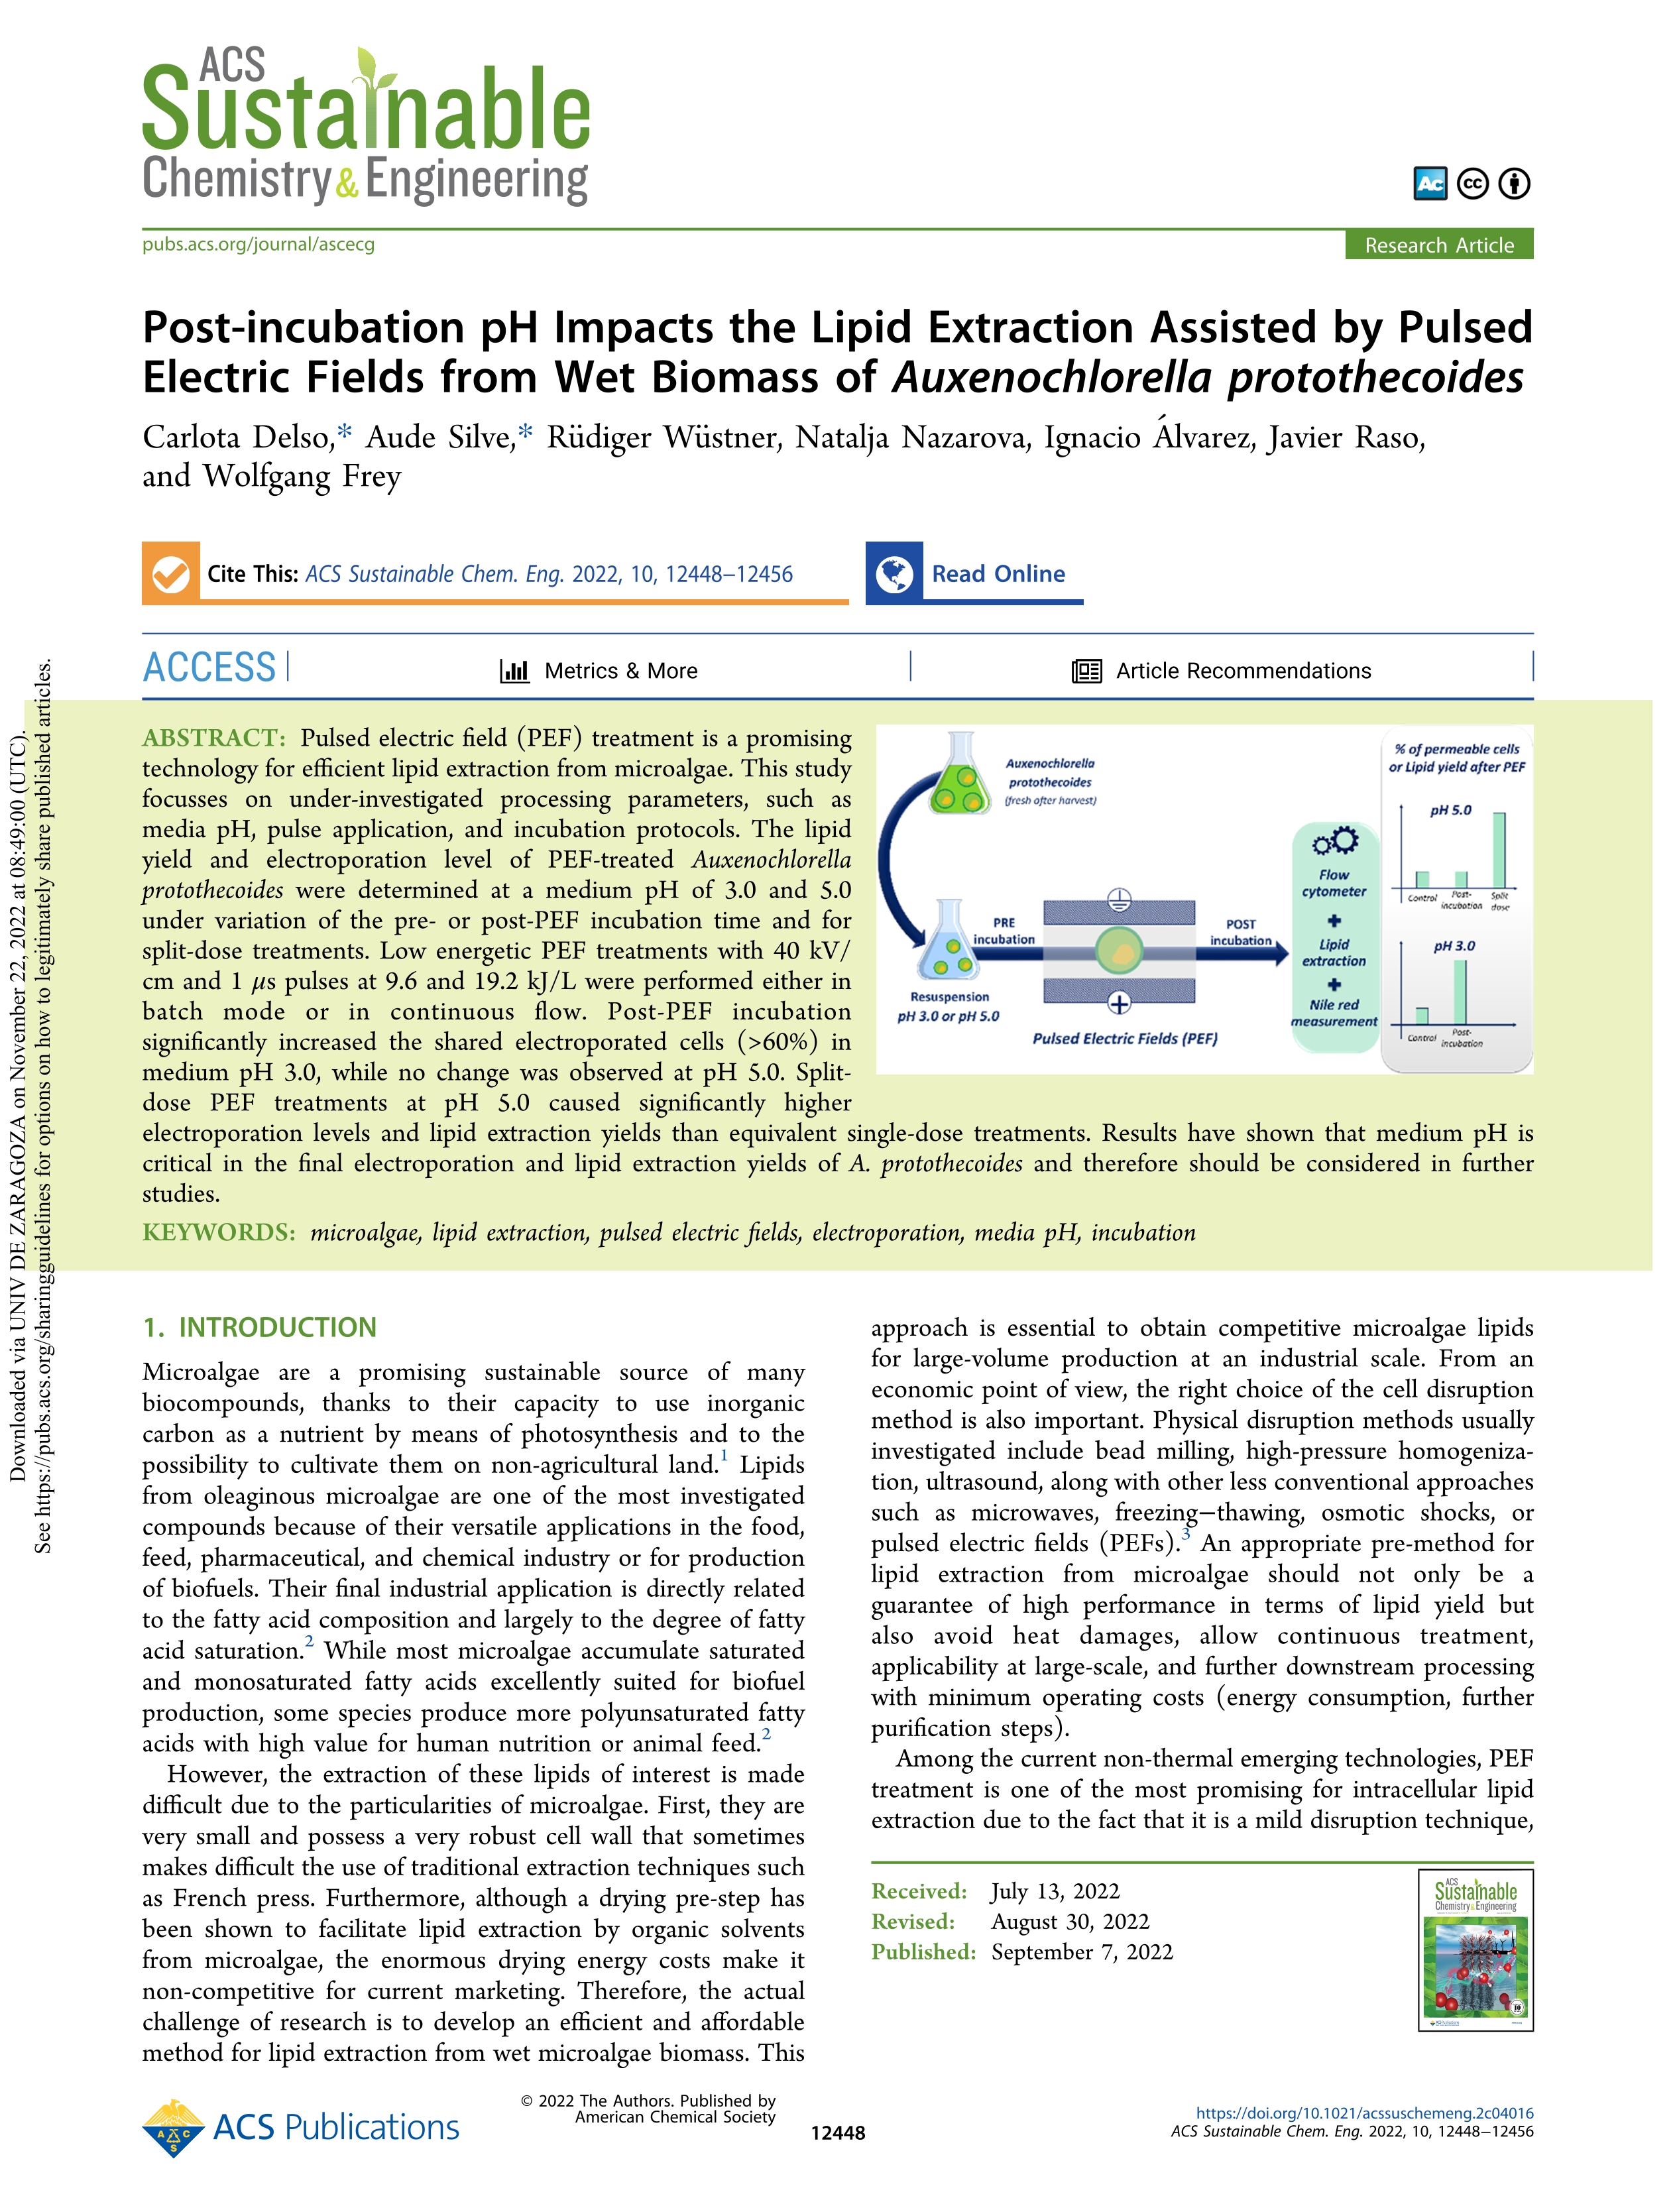 Post-incubation pH Impacts the Lipid Extraction Assisted by Pulsed Electric Fields from Wet Biomass of 